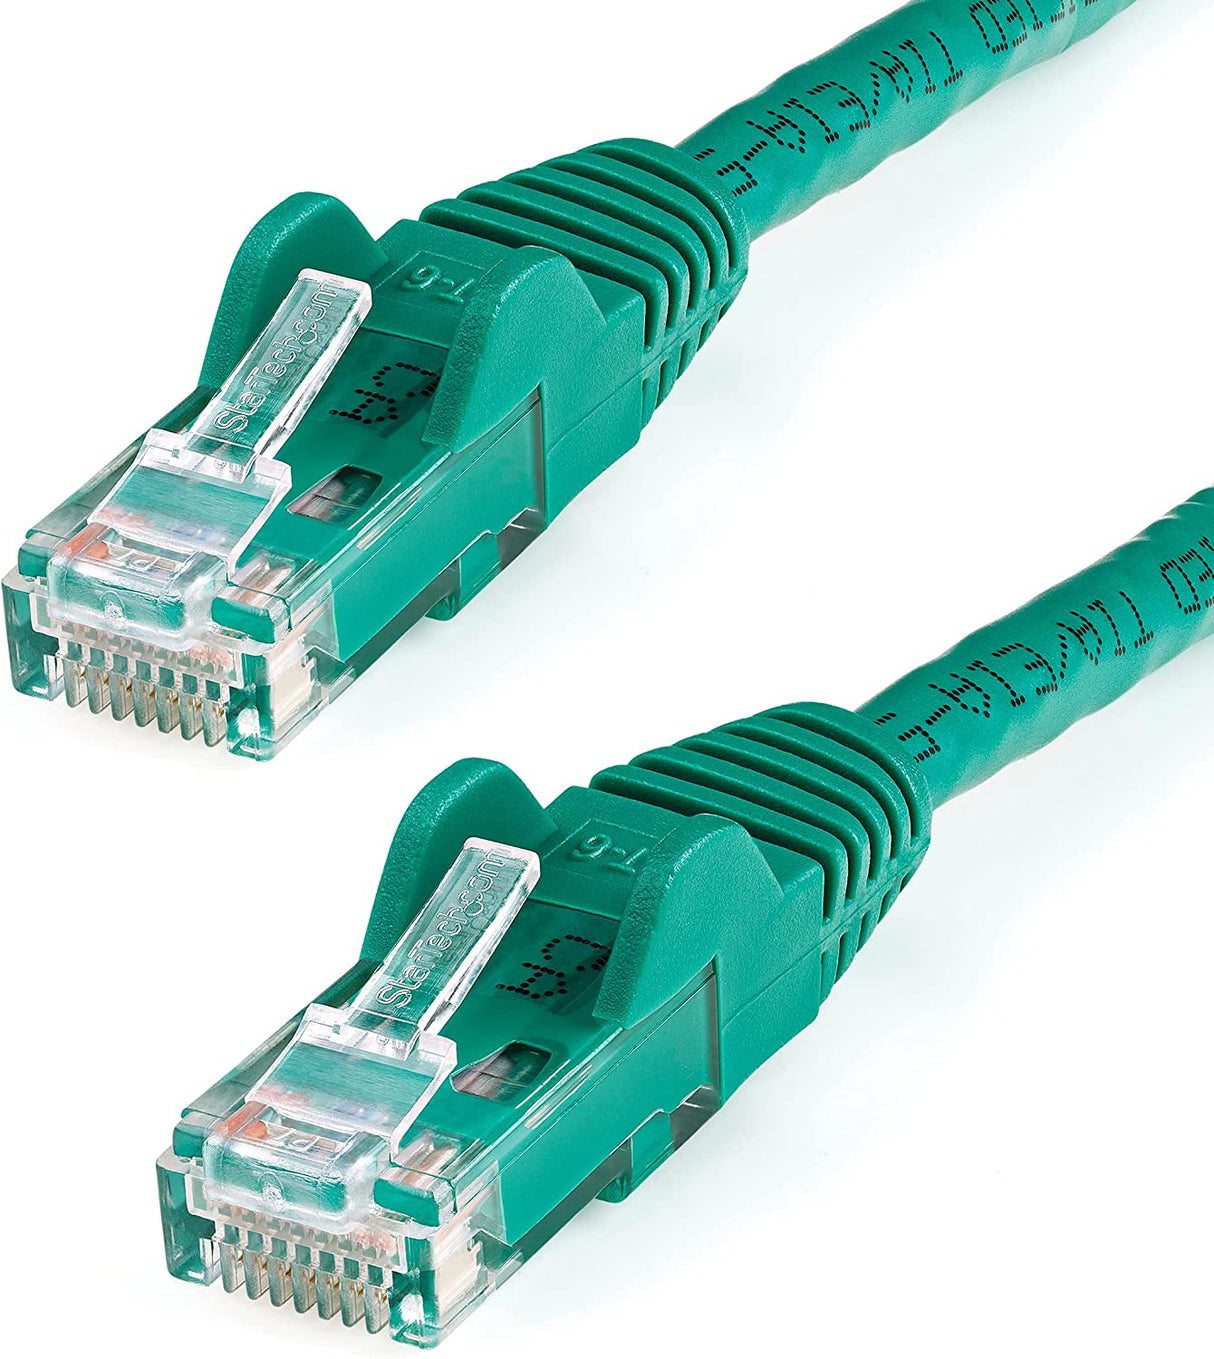 StarTech.com 2ft CAT6 Ethernet Cable - Green CAT 6 Gigabit Ethernet Wire -650MHz 100W PoE++ RJ45 UTP Category 6 Network/Patch Cord Snagless w/Strain Relief Fluke Tested UL/TIA Certified (N6PATCH2GN) Green 2 ft / 0.6 m 1 Pack